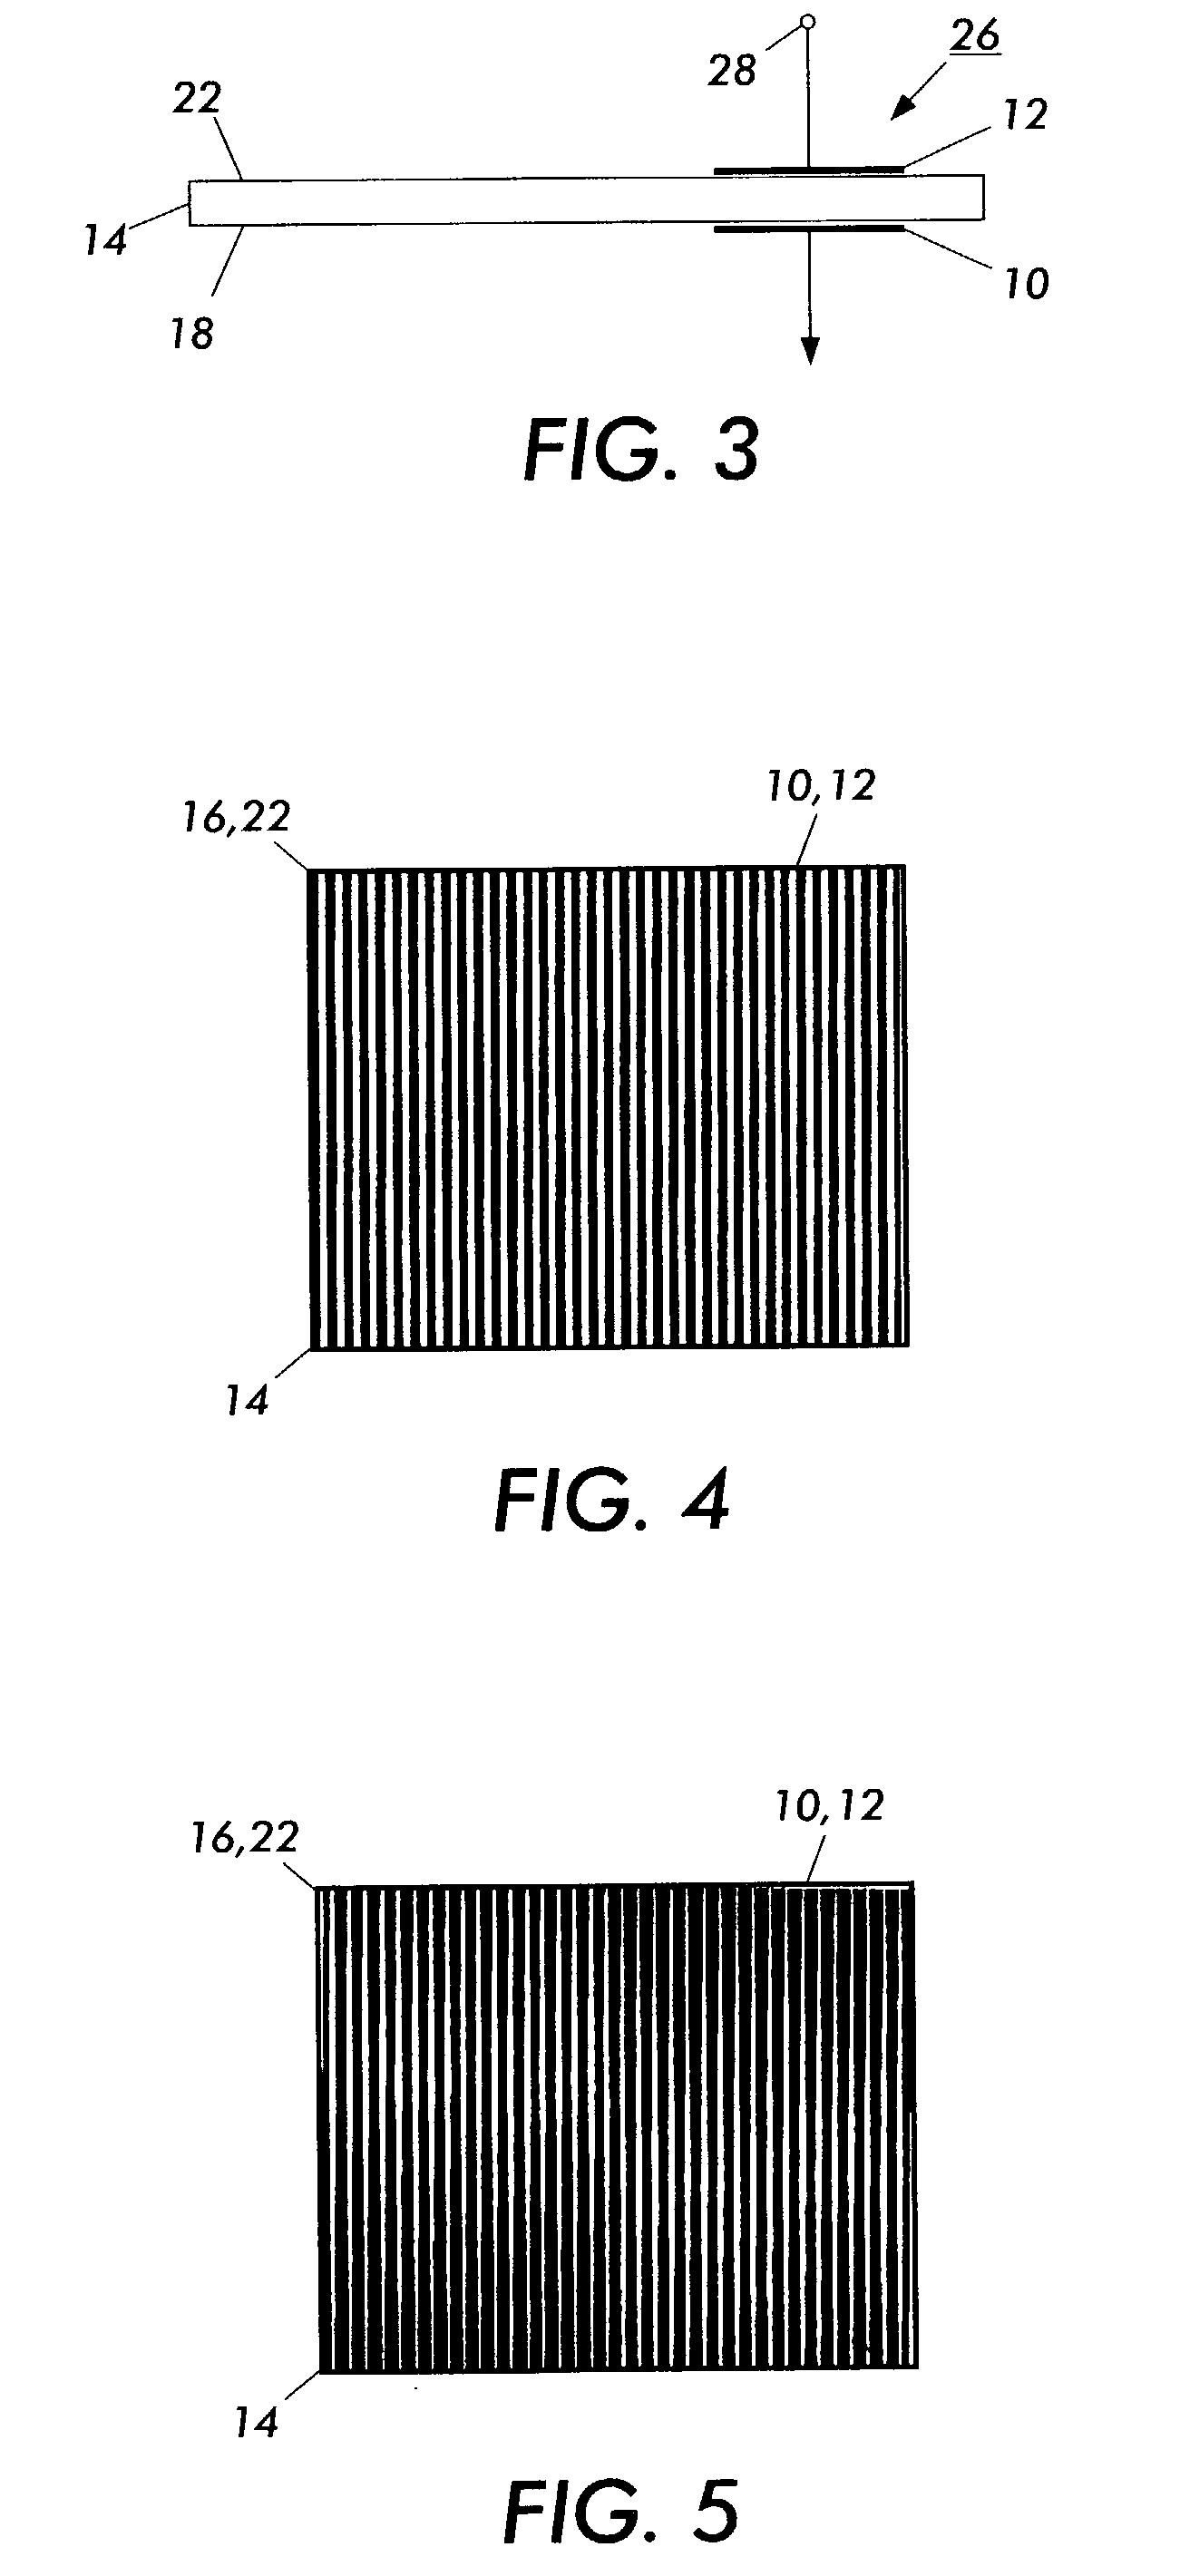 Anti-counterfeiting see-through moire security feature using frequency-varying patterns